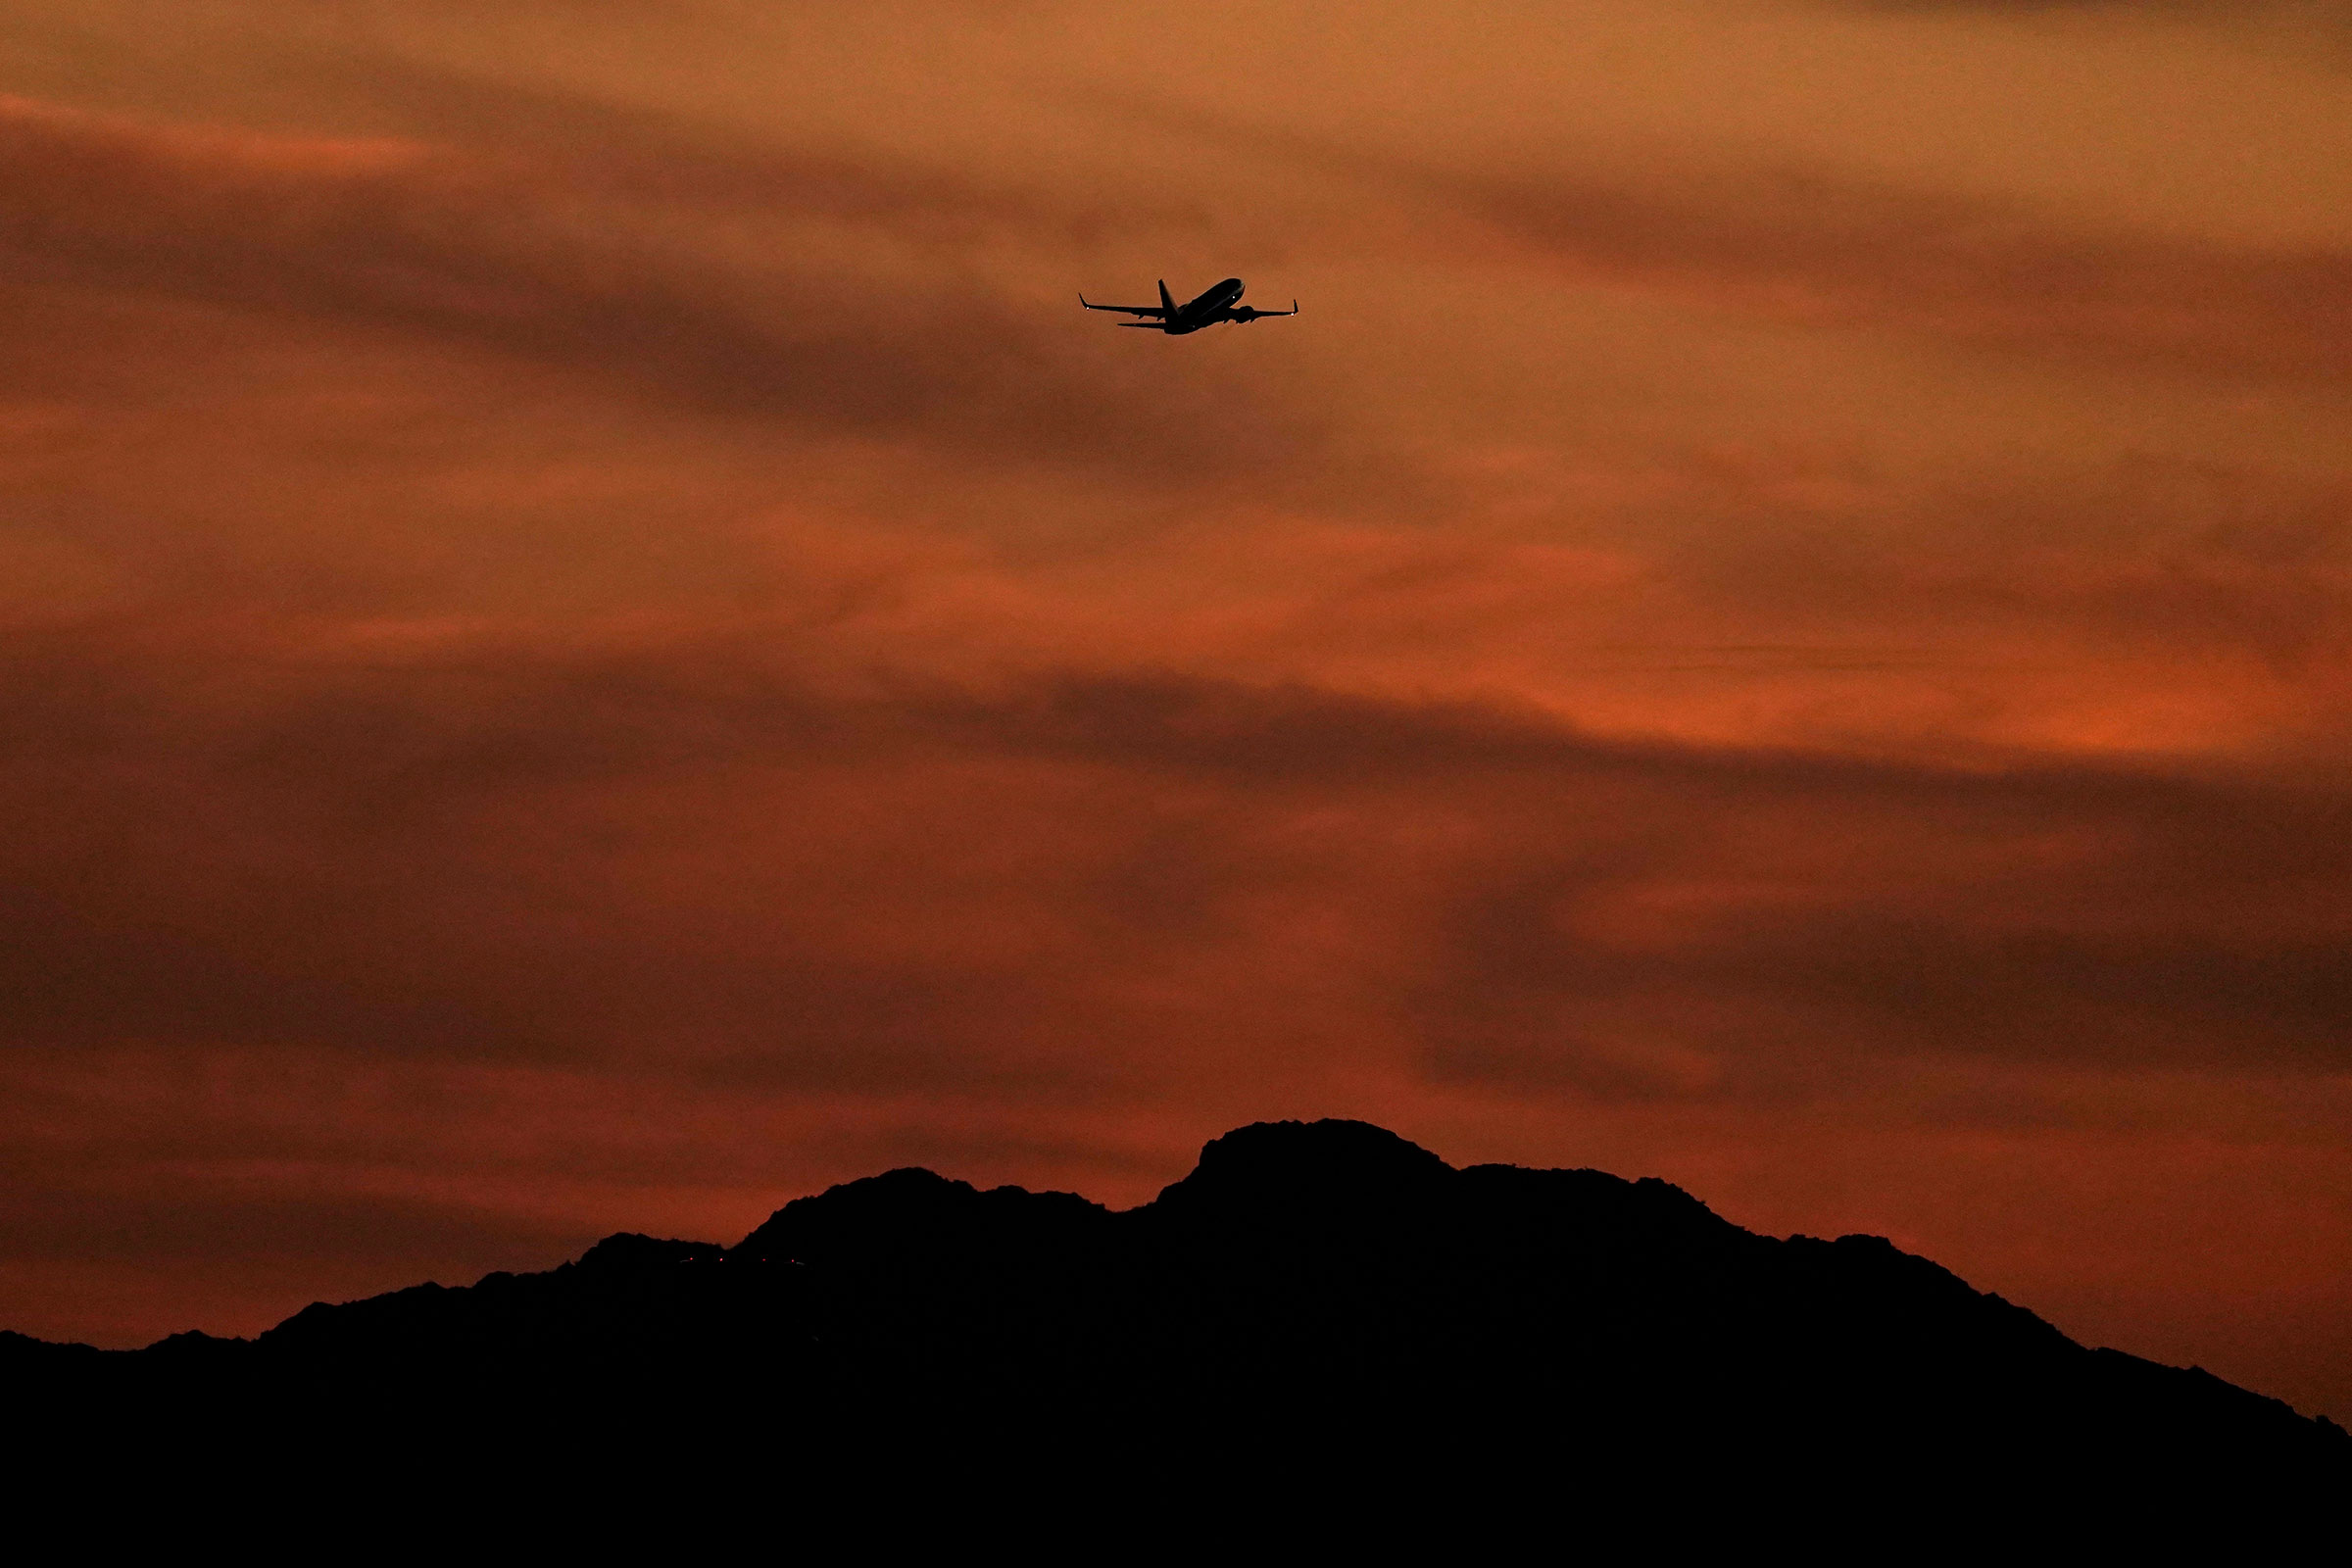 A passenger jet is silhouetted against the sky at dusk as it takes off from Sky Harbor Airport in Phoenix, on April 2, 2022. (Charlie Riedel—AP)